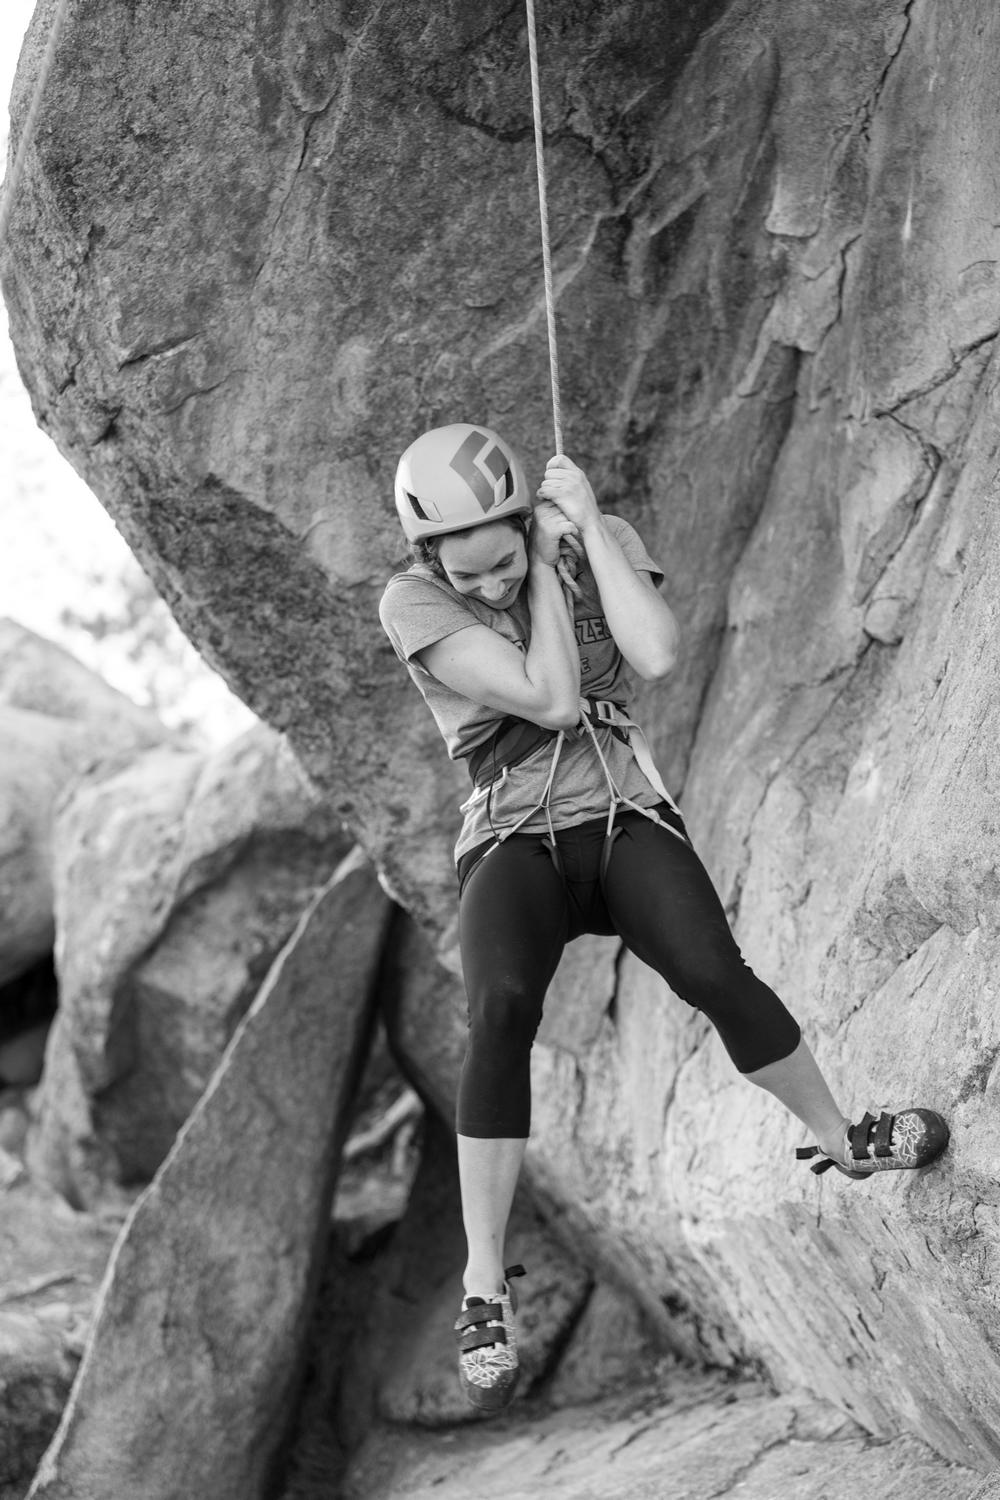 Lady practising rock climbing with helmet and harness